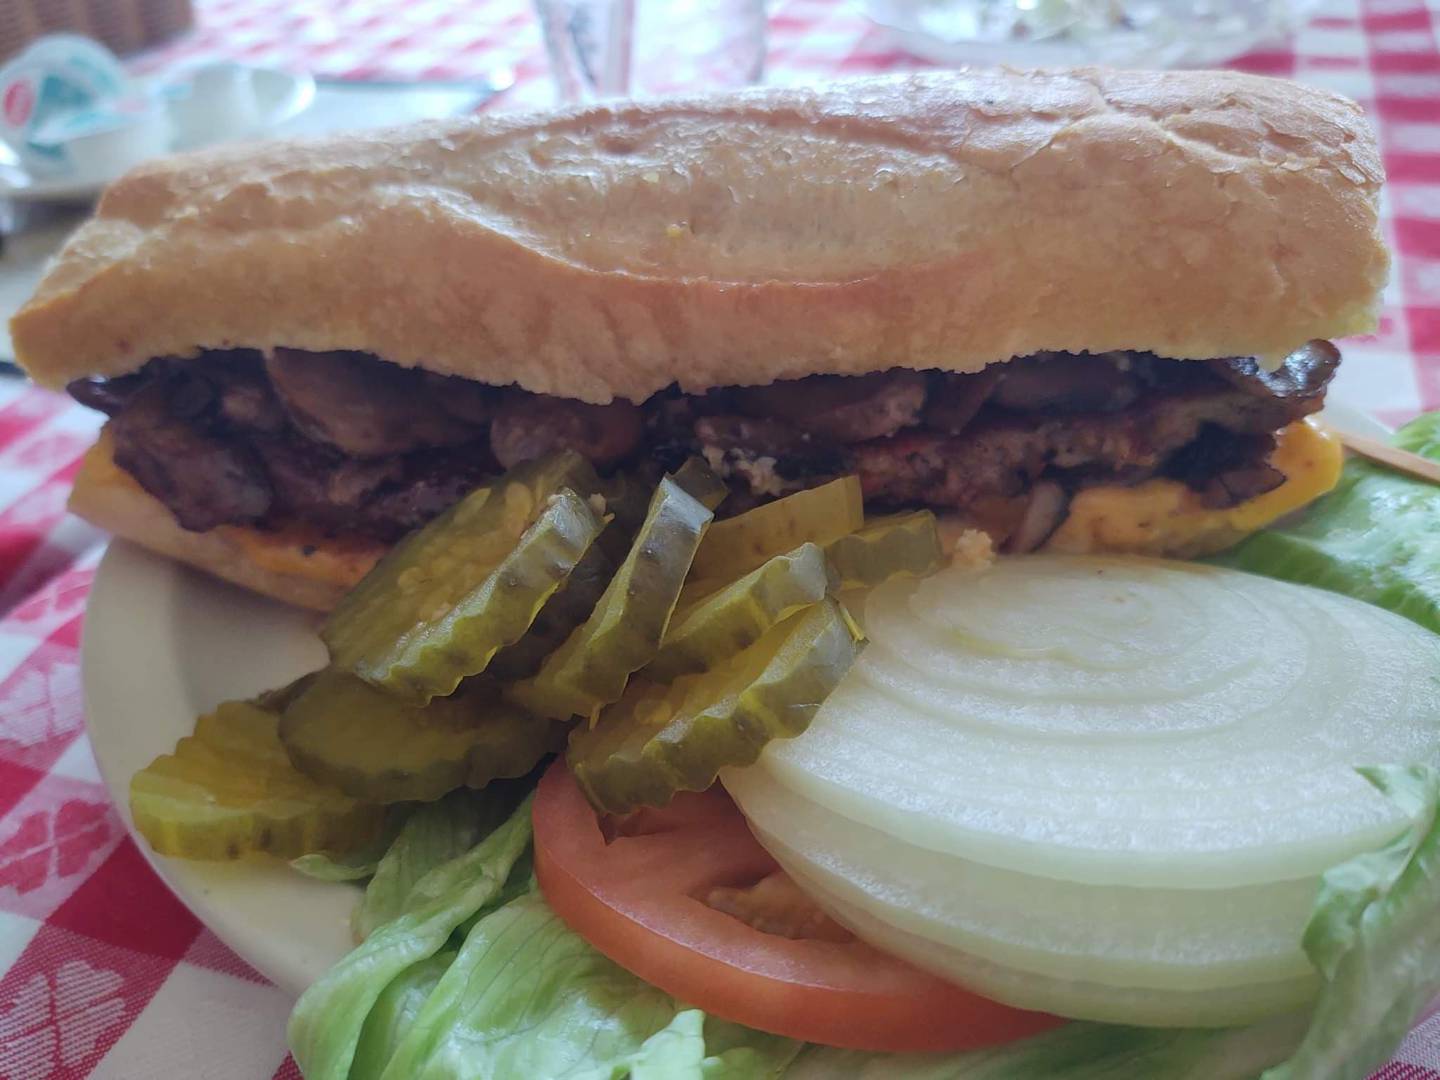 Merichka's in Crest Hill offers a few vegetarian options, too. This "poorboy" featured a veggie burder and generous vegetable toppings: grilled onions and mushrooms on the burger and lettuce, tomato, onion and pickles on the side.